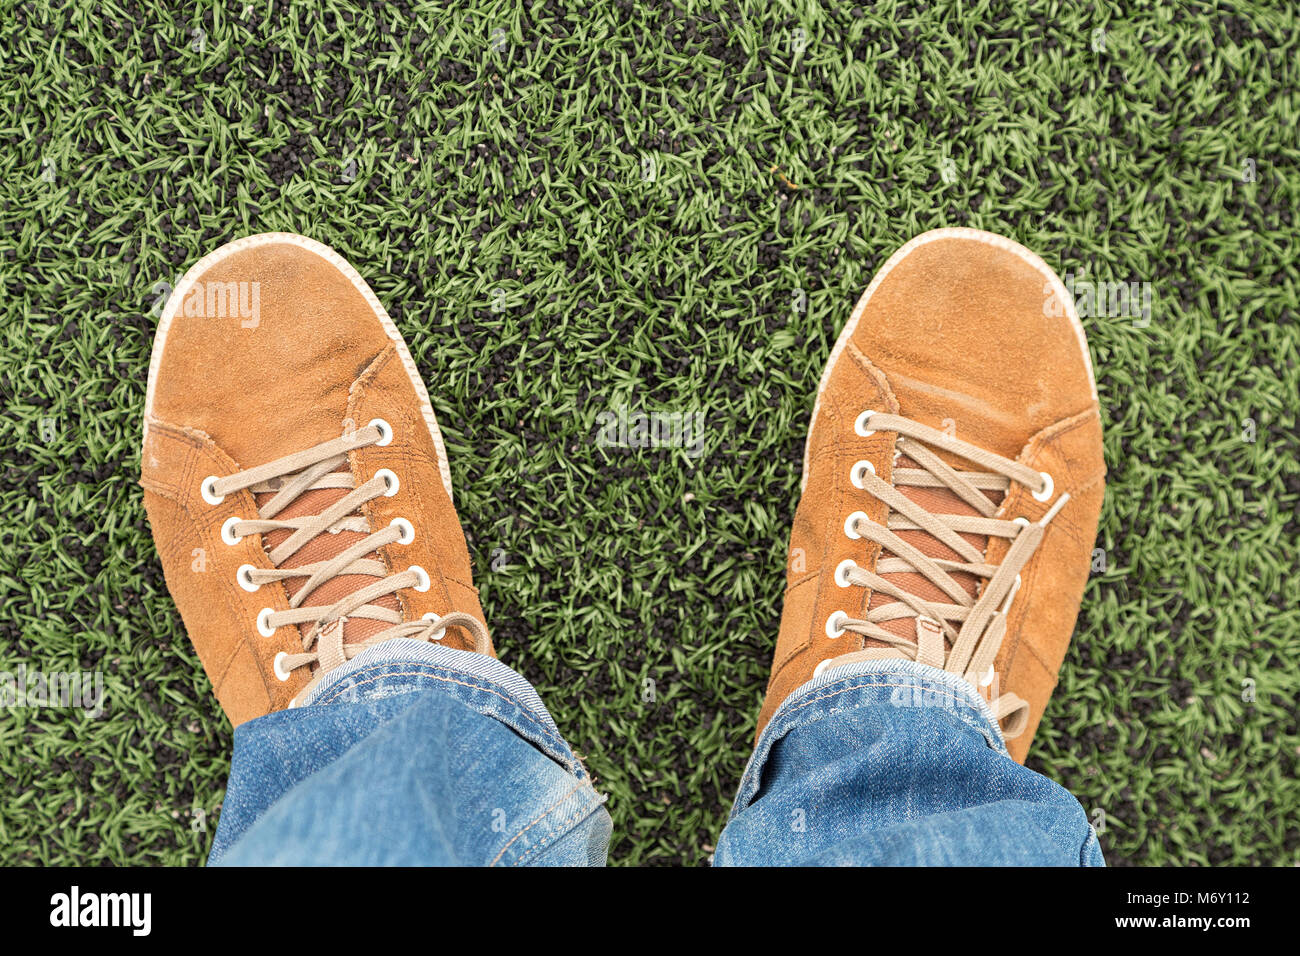 Man in leather orange  sneakers and blue jeans stands on fresh green grass, top view Stock Photo